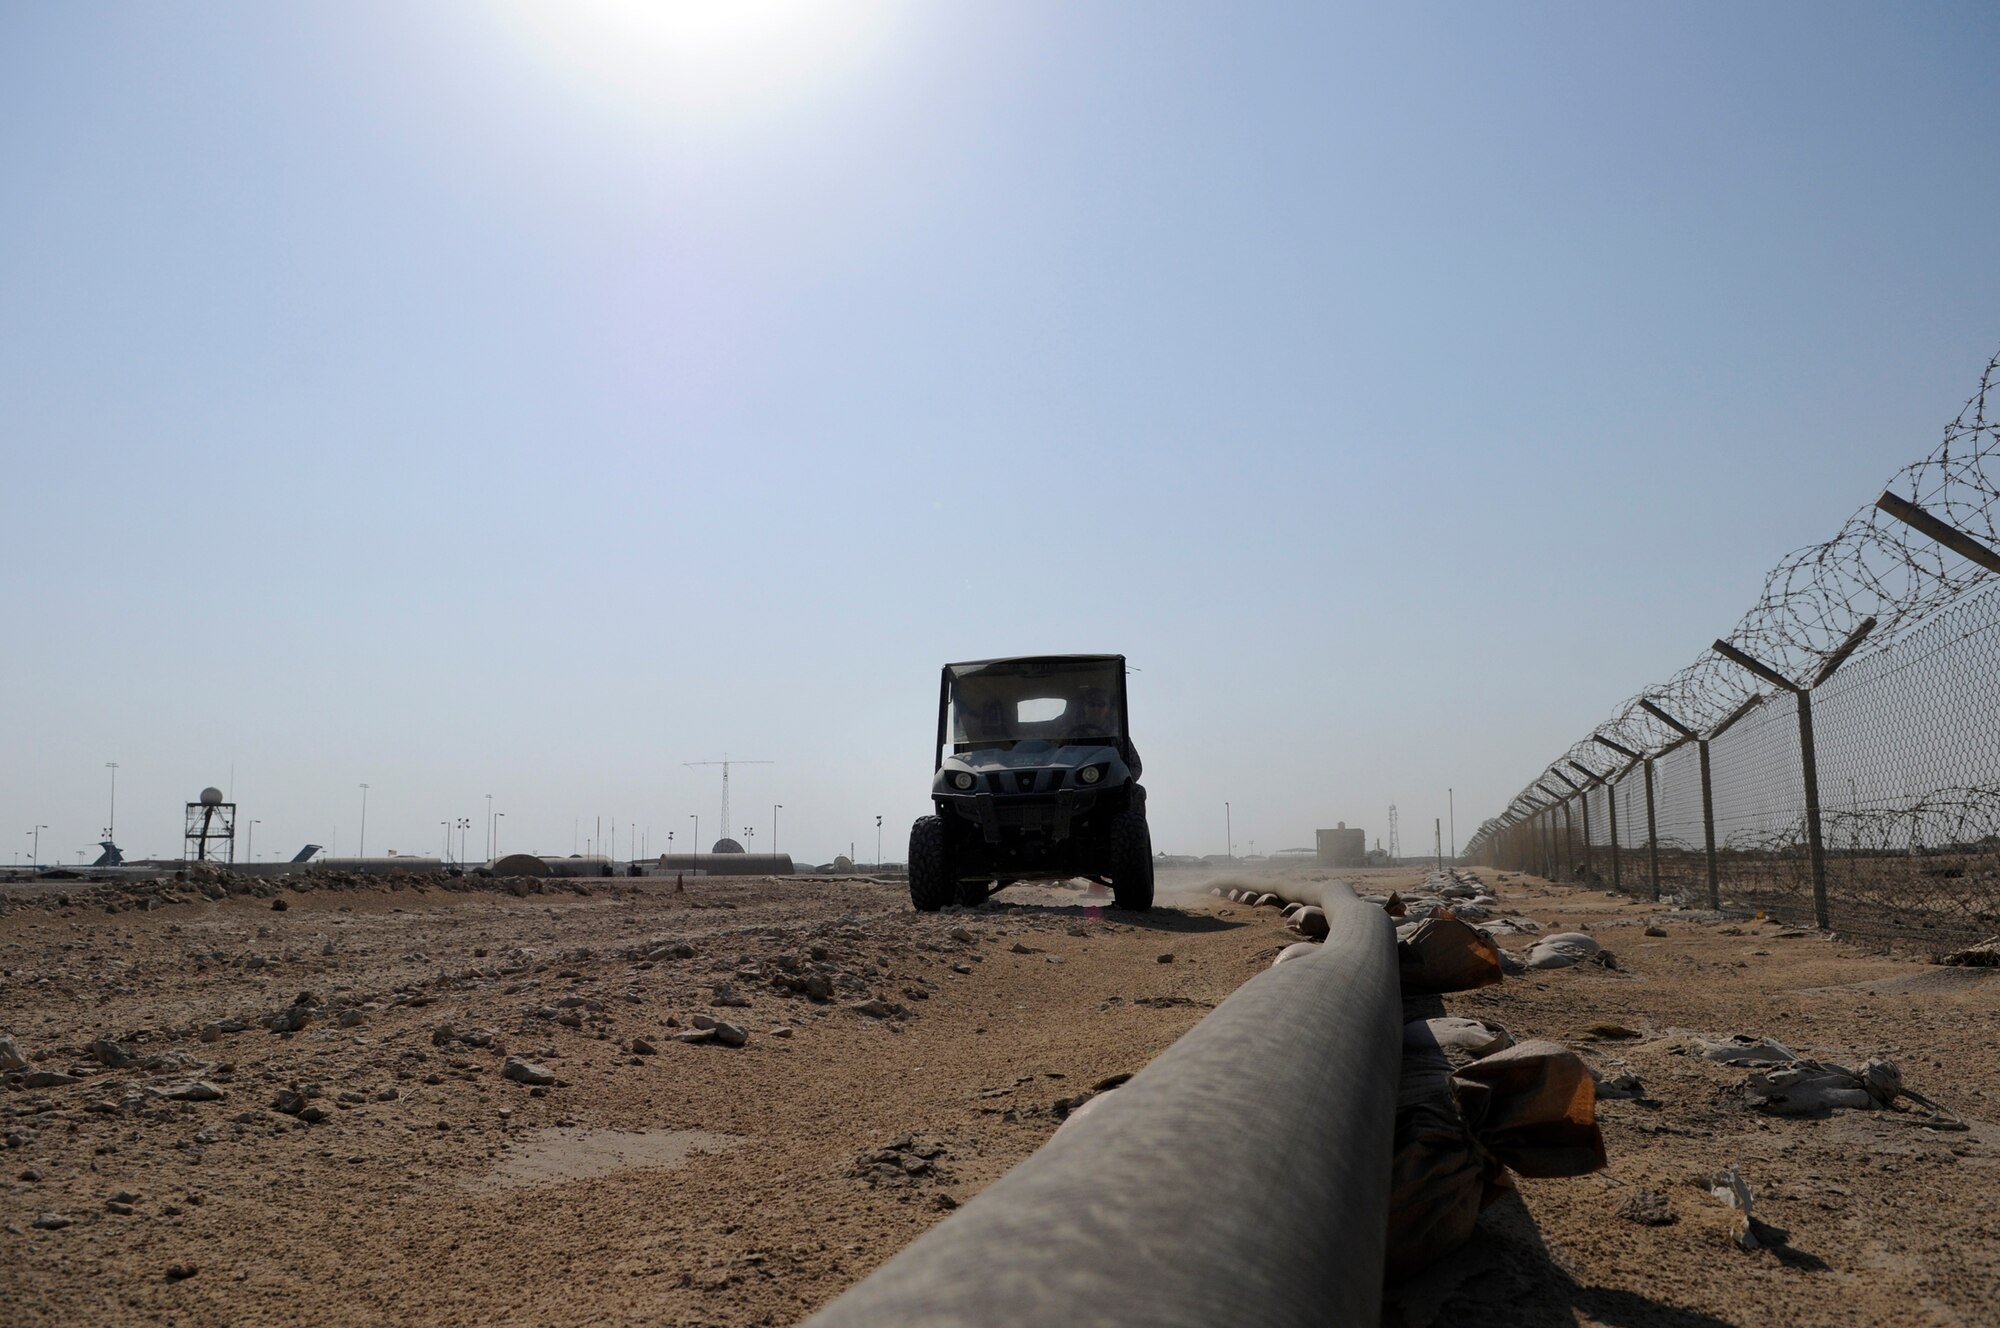 Staff Sgt. George Mitchell, fuels craftsman assigned to the 379th Expeditionary Logistics Readiness Squadron, performs a security and leak check of the fuel pipeline from bulk storage to operating storage, Nov. 14, at an undisclosed air base in Southwest Asia.  "Running the line" is a preventative procedure that keeps the fuel flowing to "fuel the fight."  Approximately one million gallons of fuel are moved each day through the 379 ELRS fuels section, keeping aircraft flying in Operations Iraqi and Enduring Freedom and Joint Task Force-Horn of Africa.  Sergeant Mitchell, a native of Lady Lake, Fla., is deployed from Shaw Air Force Base, S.C.  (U.S. Air Force Base photo by Tech. Sgt. Michael Boquette/Released)